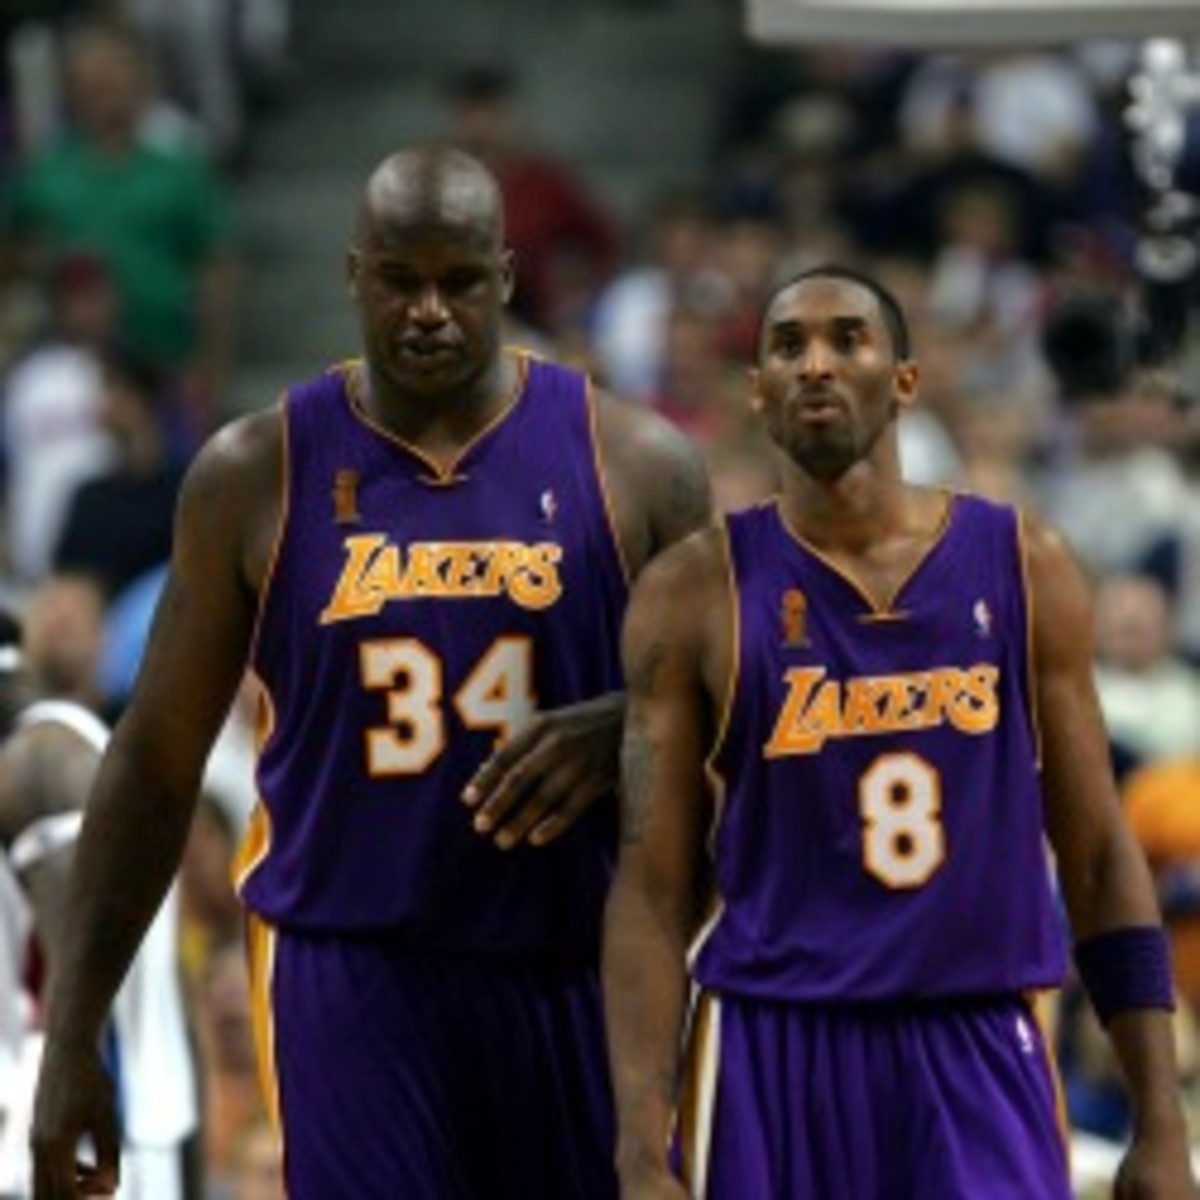 Kobe Bryant says his relationship with Shaquille O'Neal is better after years of feuding. (Jesse D. Garrabrant/NBA/Getty Images)